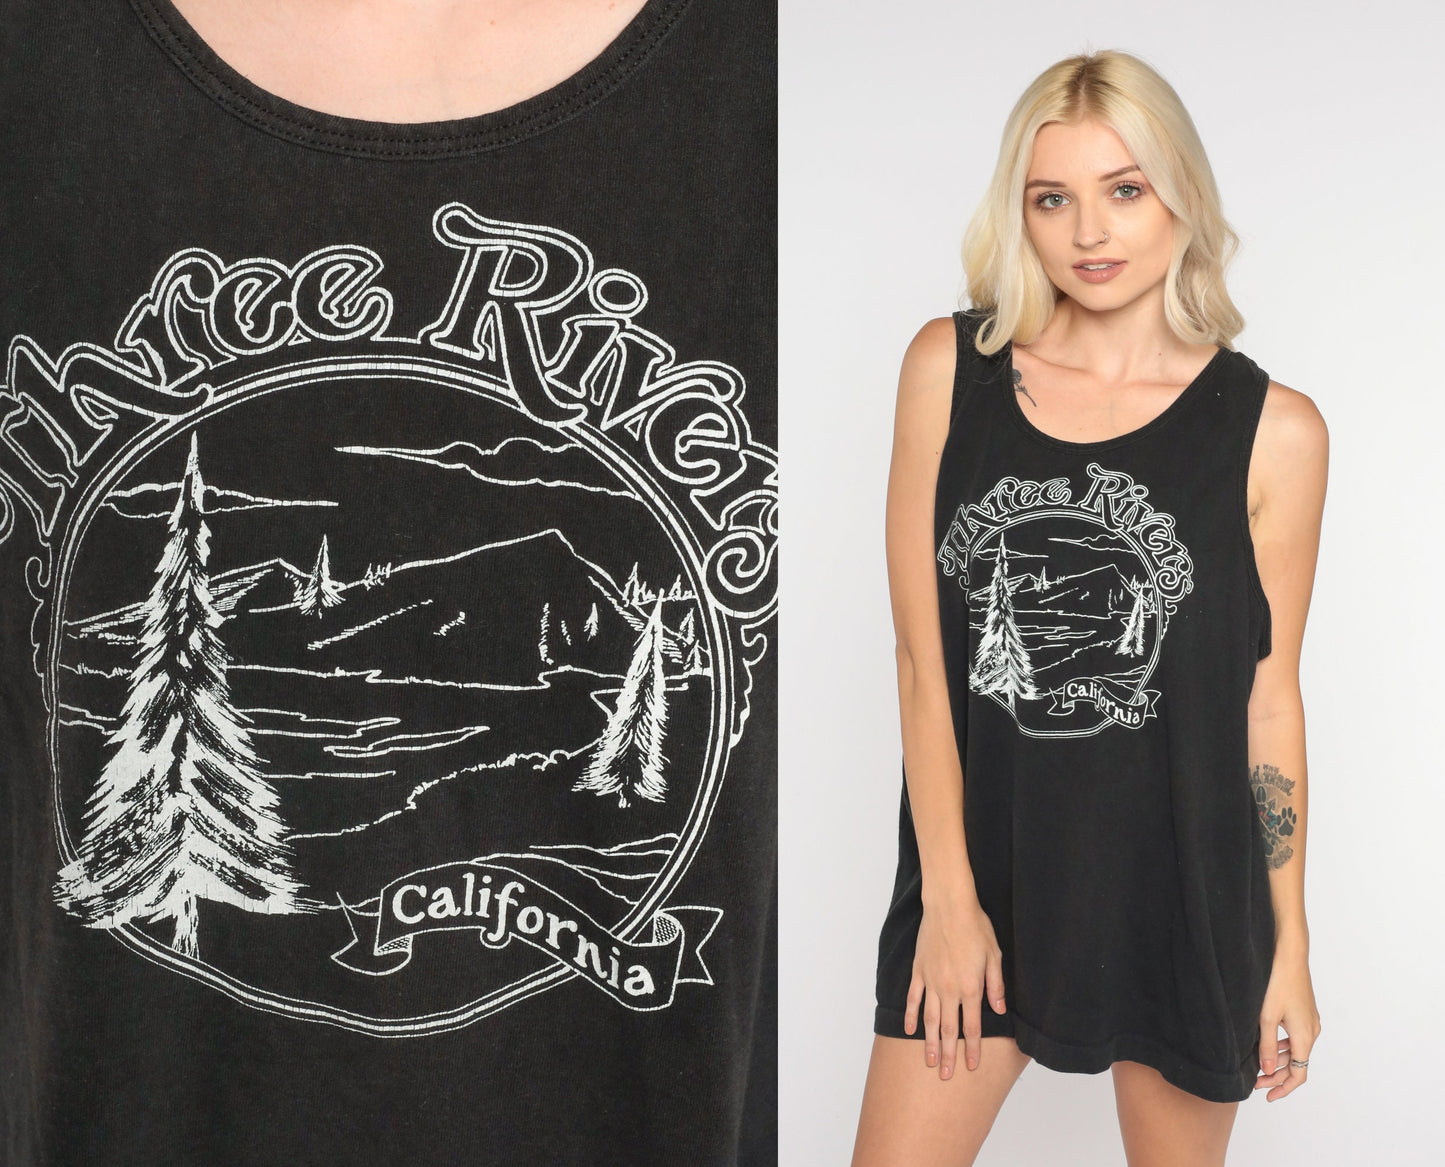 Three Rivers Tank Top 90s California T-Shirt Forest Trees Mountains Graphic Tee Tourist Sleeveless Shirt Black Vintage 1990s Extra Large xl